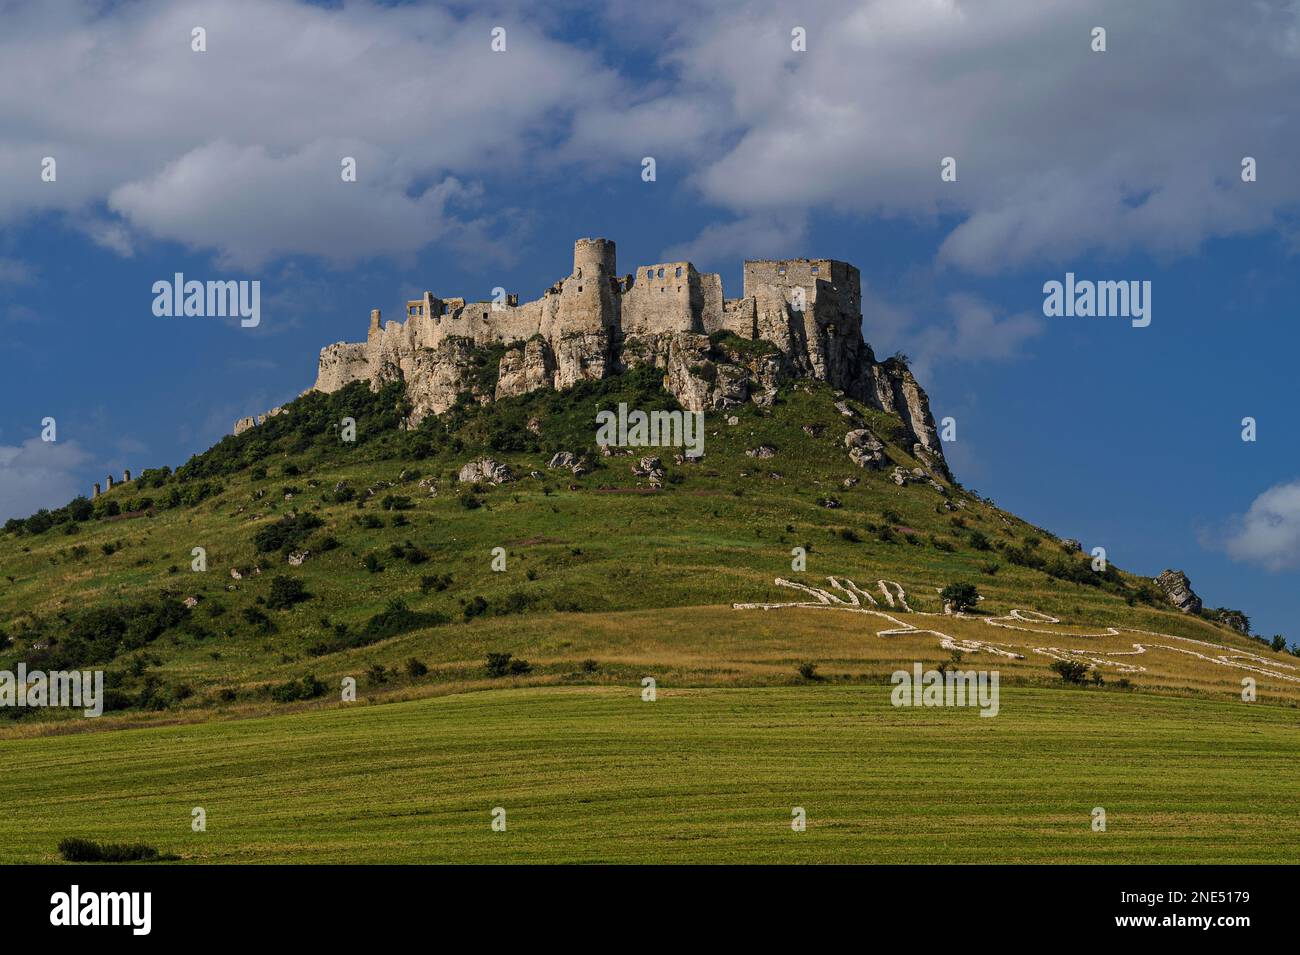 Spiš Castle, a formidable fortress built by medieval Hungarian kings, stands on a 200m-high limestone spur in the Košice Region of eastern Slovakia above ‘Sacred’, a 2008 geoglyph or land art installation by Australian sculptor Andrew Rogers inspired by a horse depicted on an ancient Celtic coin found within the castle ruins. Stock Photo